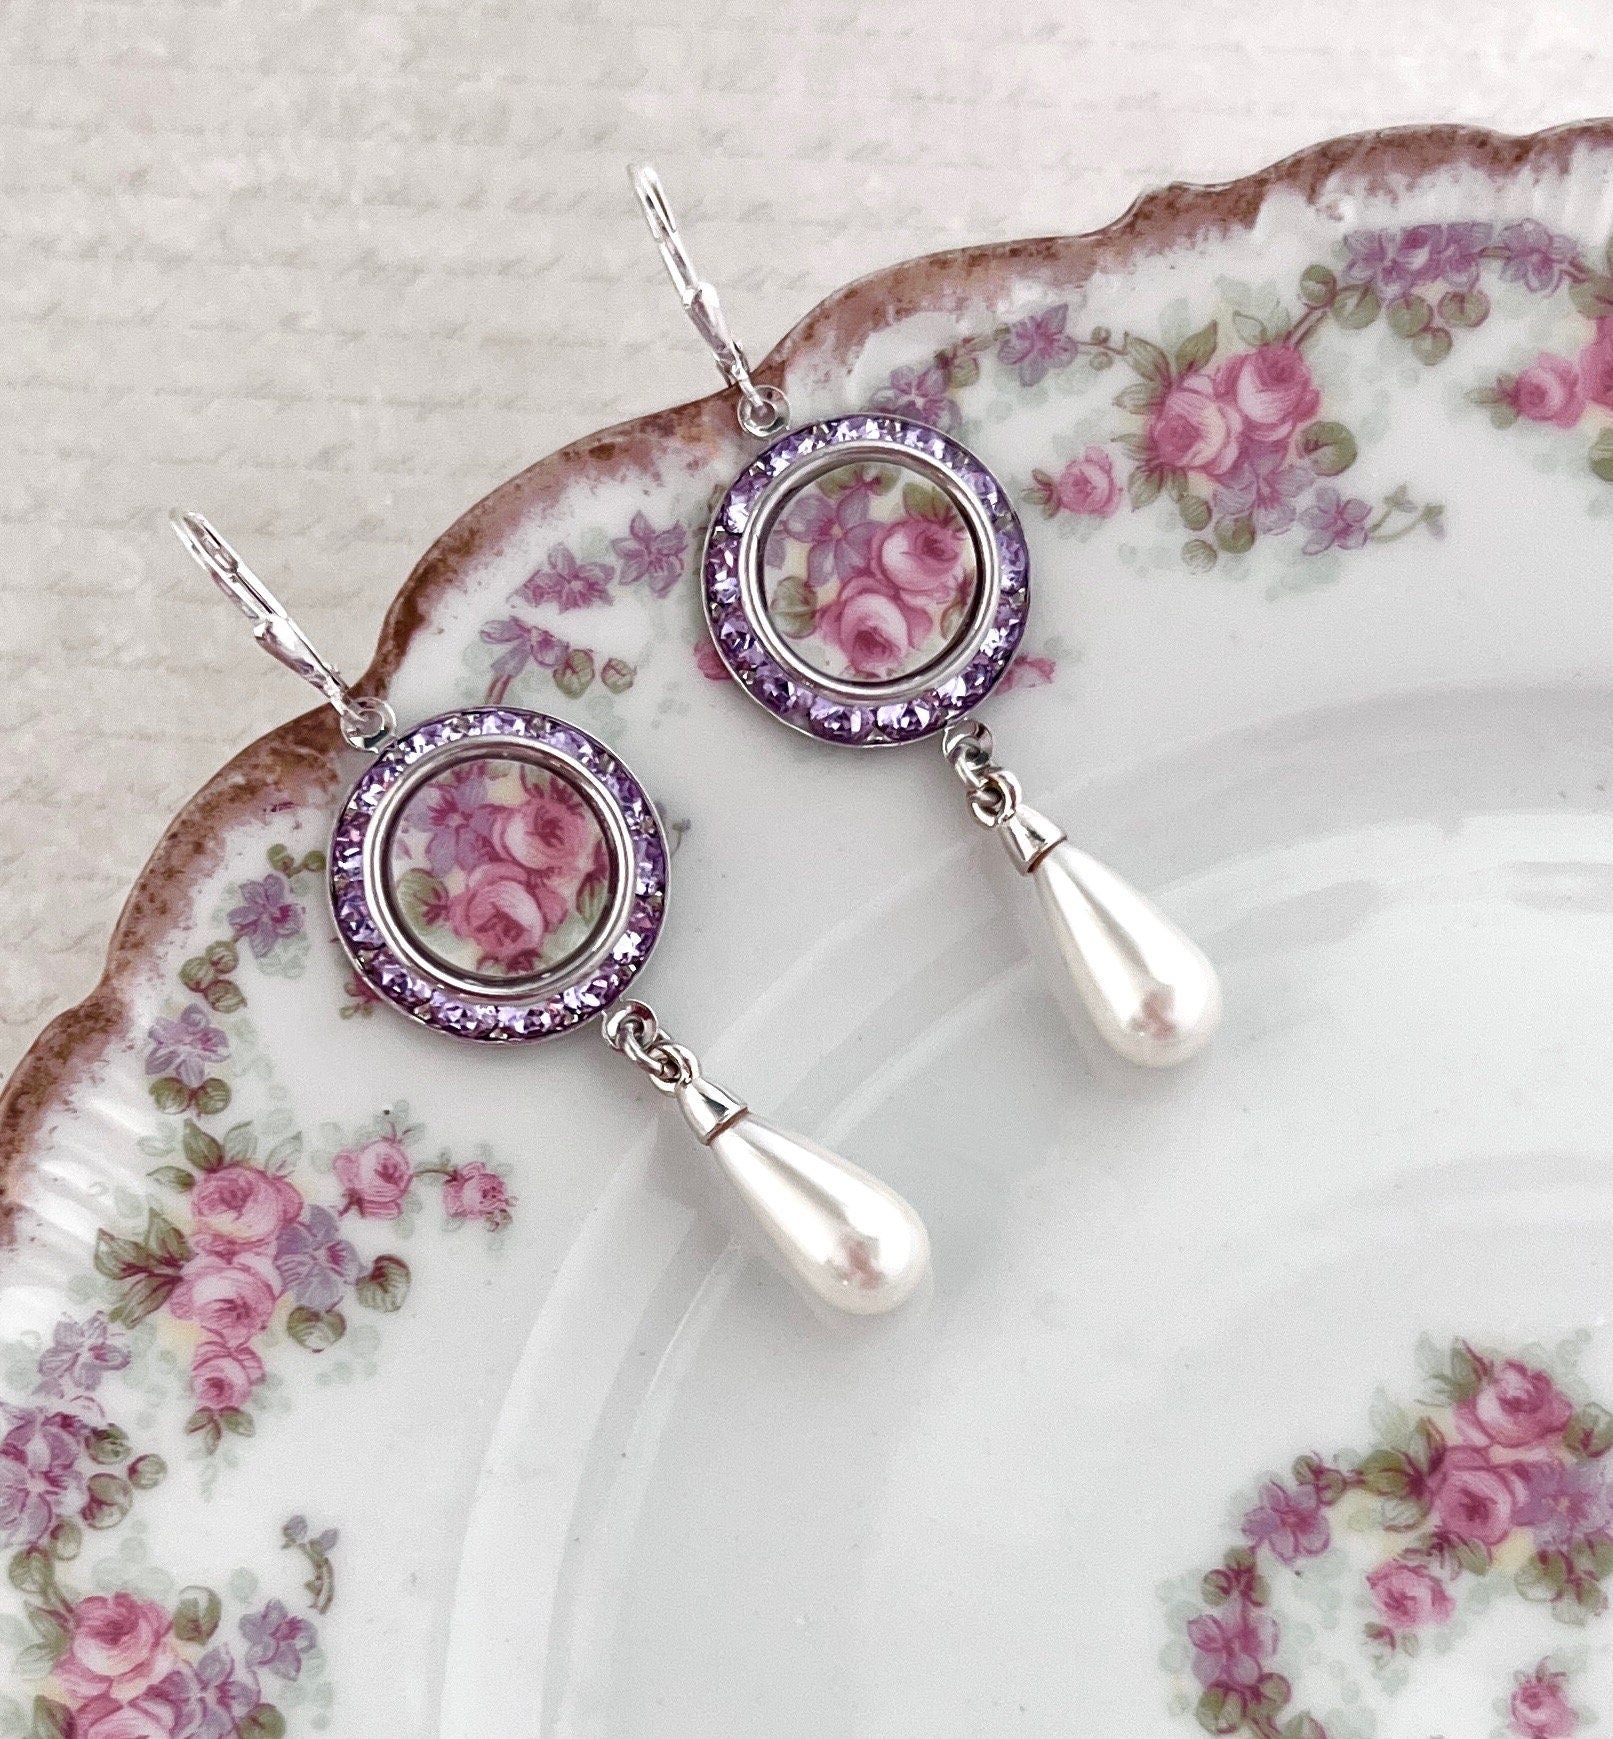 Antique French Limoges Porcelain Earrings, Unique 18th Anniversary Gift for Wife